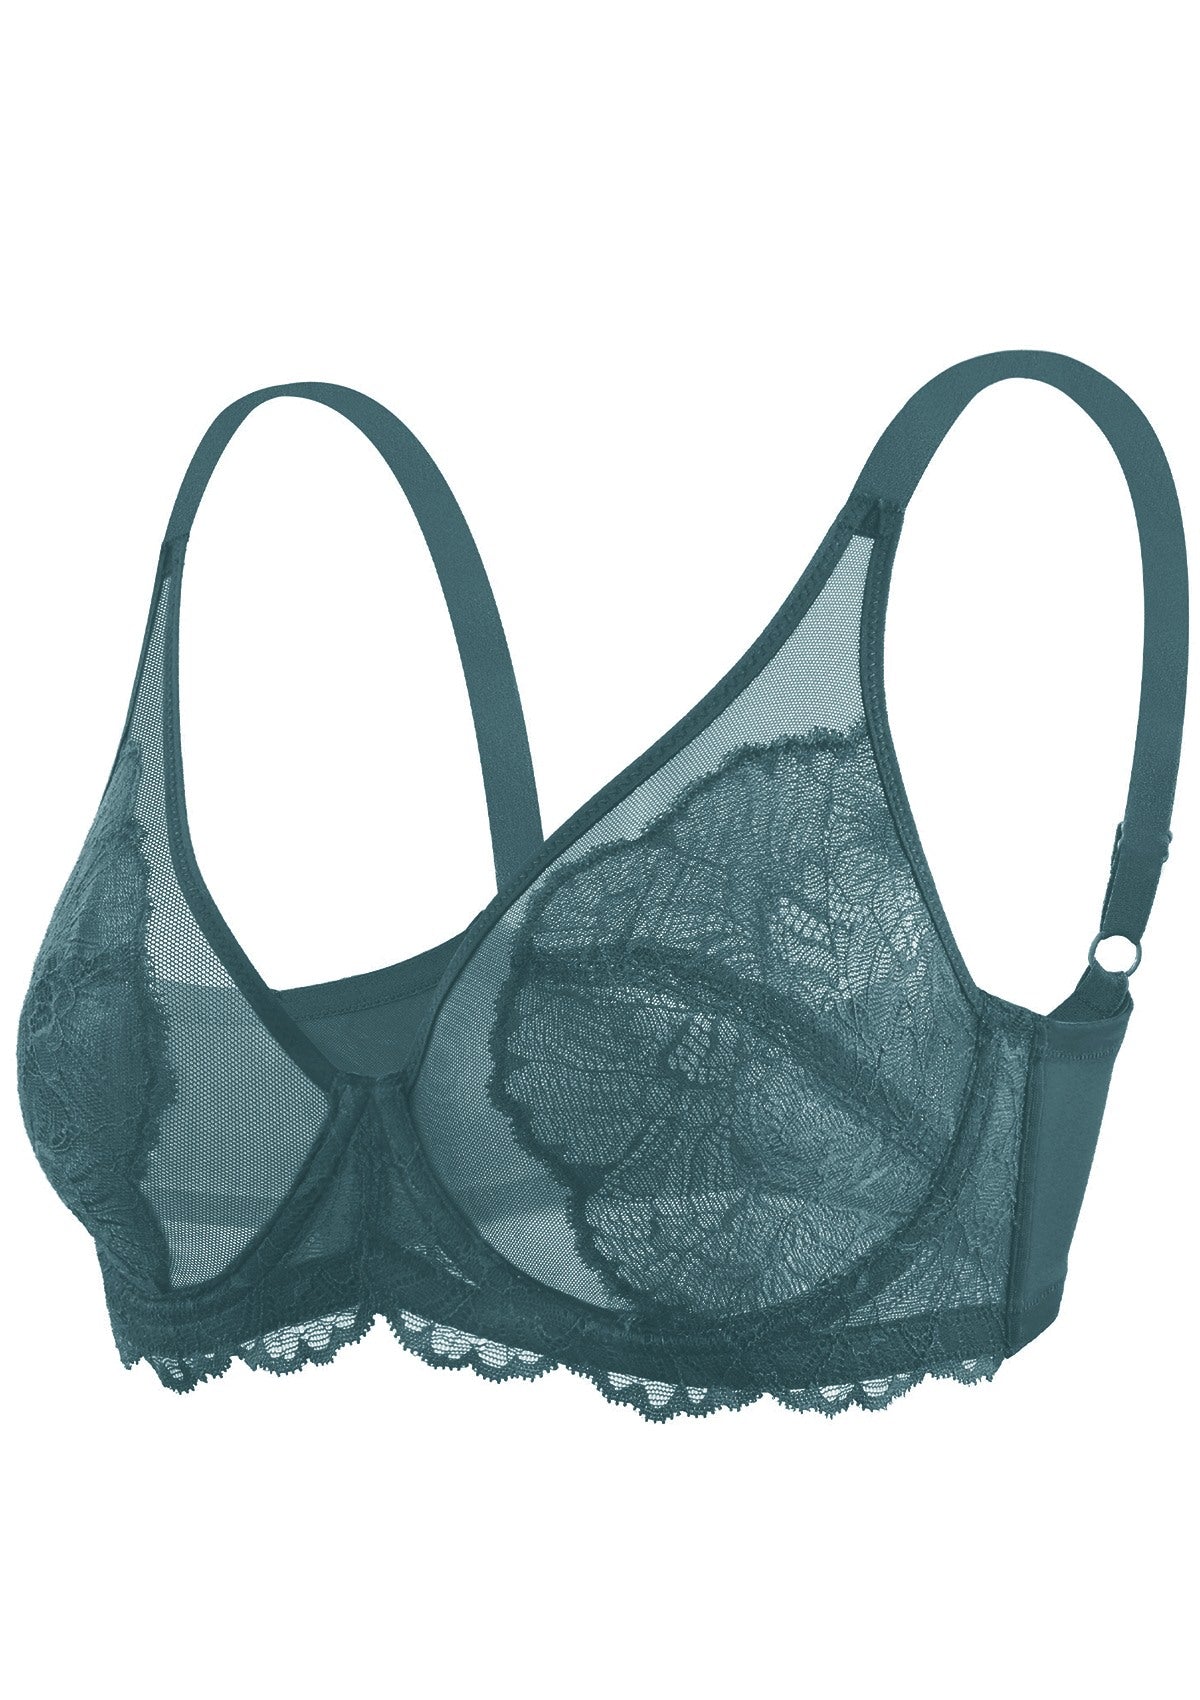 HSIA Blossom Full Figure See-Through Lace Bra For Side And Back Fat - Biscay Blue / 42 / D